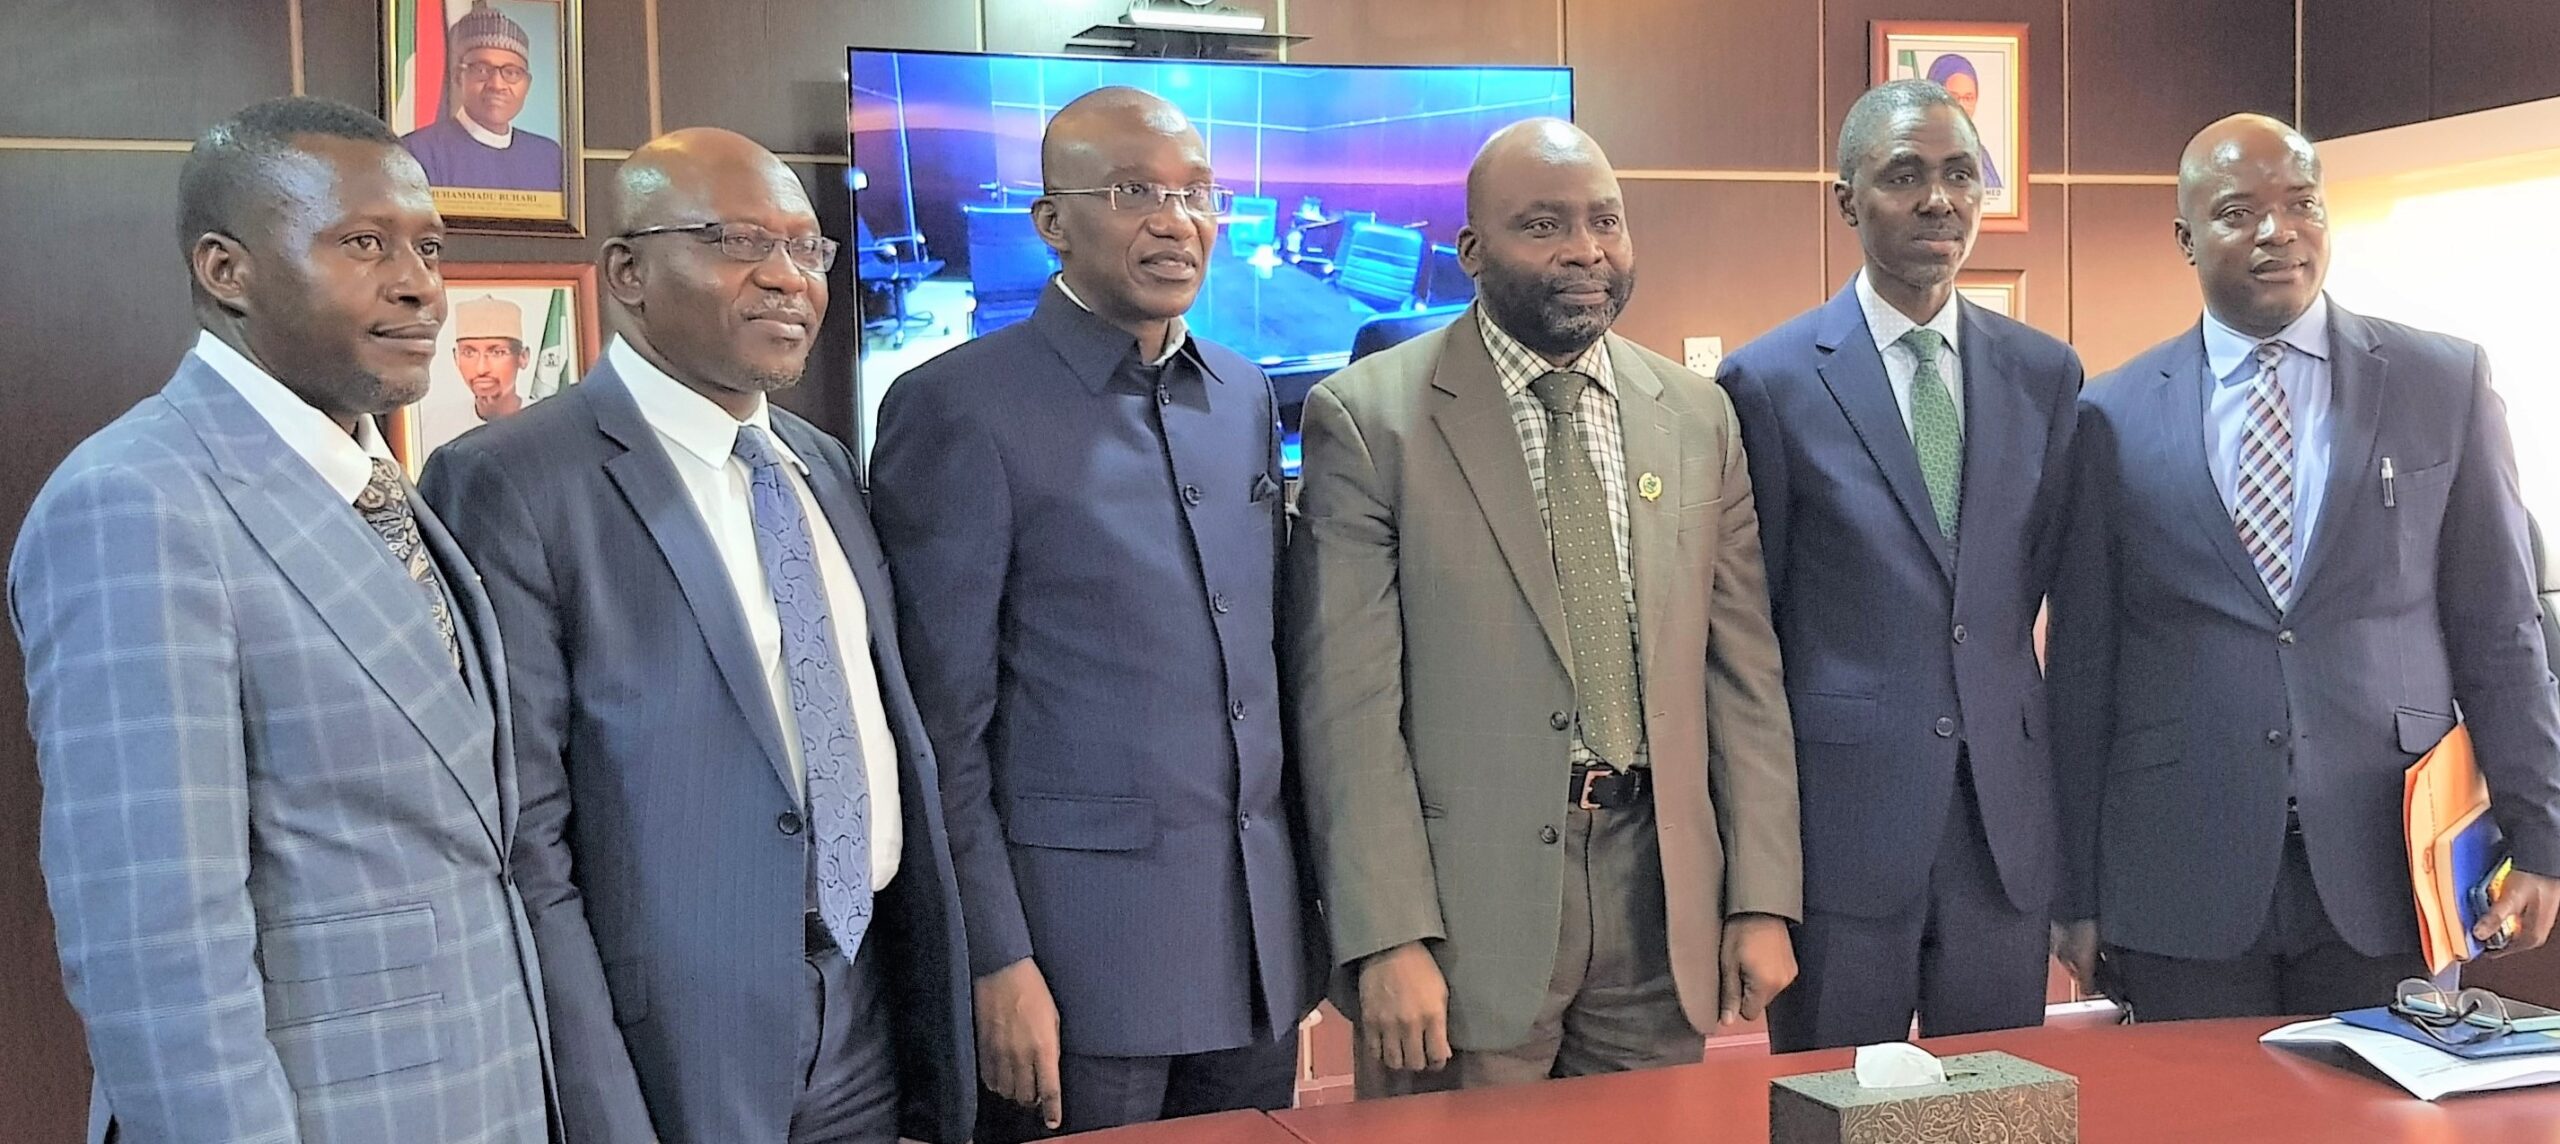 AMCON Photo:  At The Meeting Of The Inter-Agency Committee On AMCON’s Debt, Held At The Head Office Of AMCON In Abuja On Monday September 6, 2021